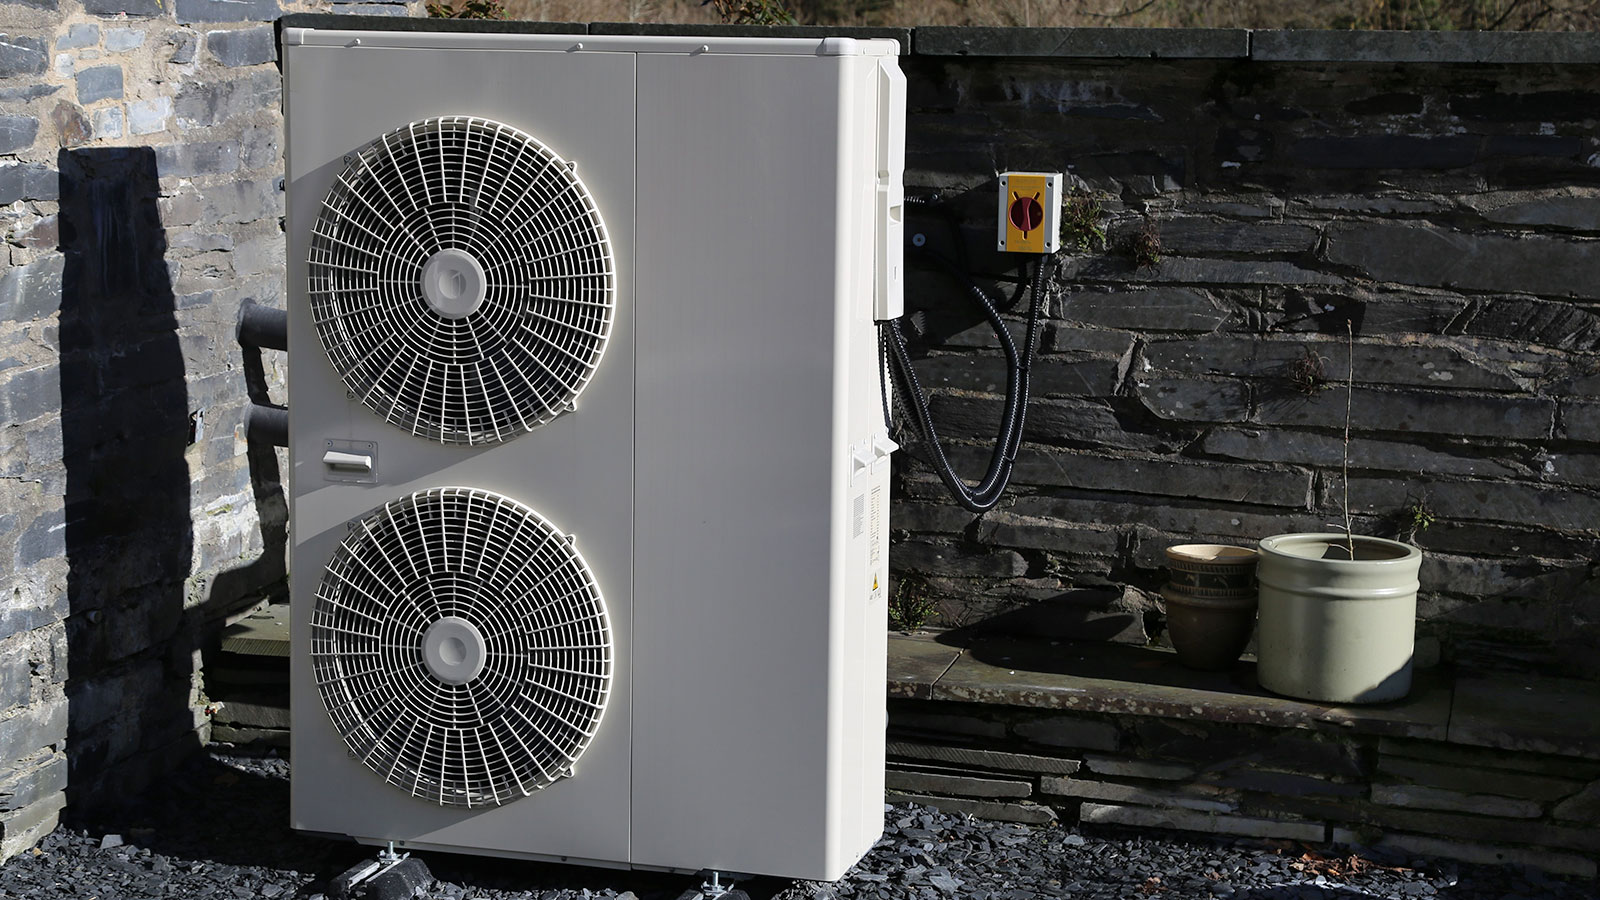 The National Audit Office has warned that heat pump sales are below expected levels, which could risk the UK’s decarbonisation efforts.